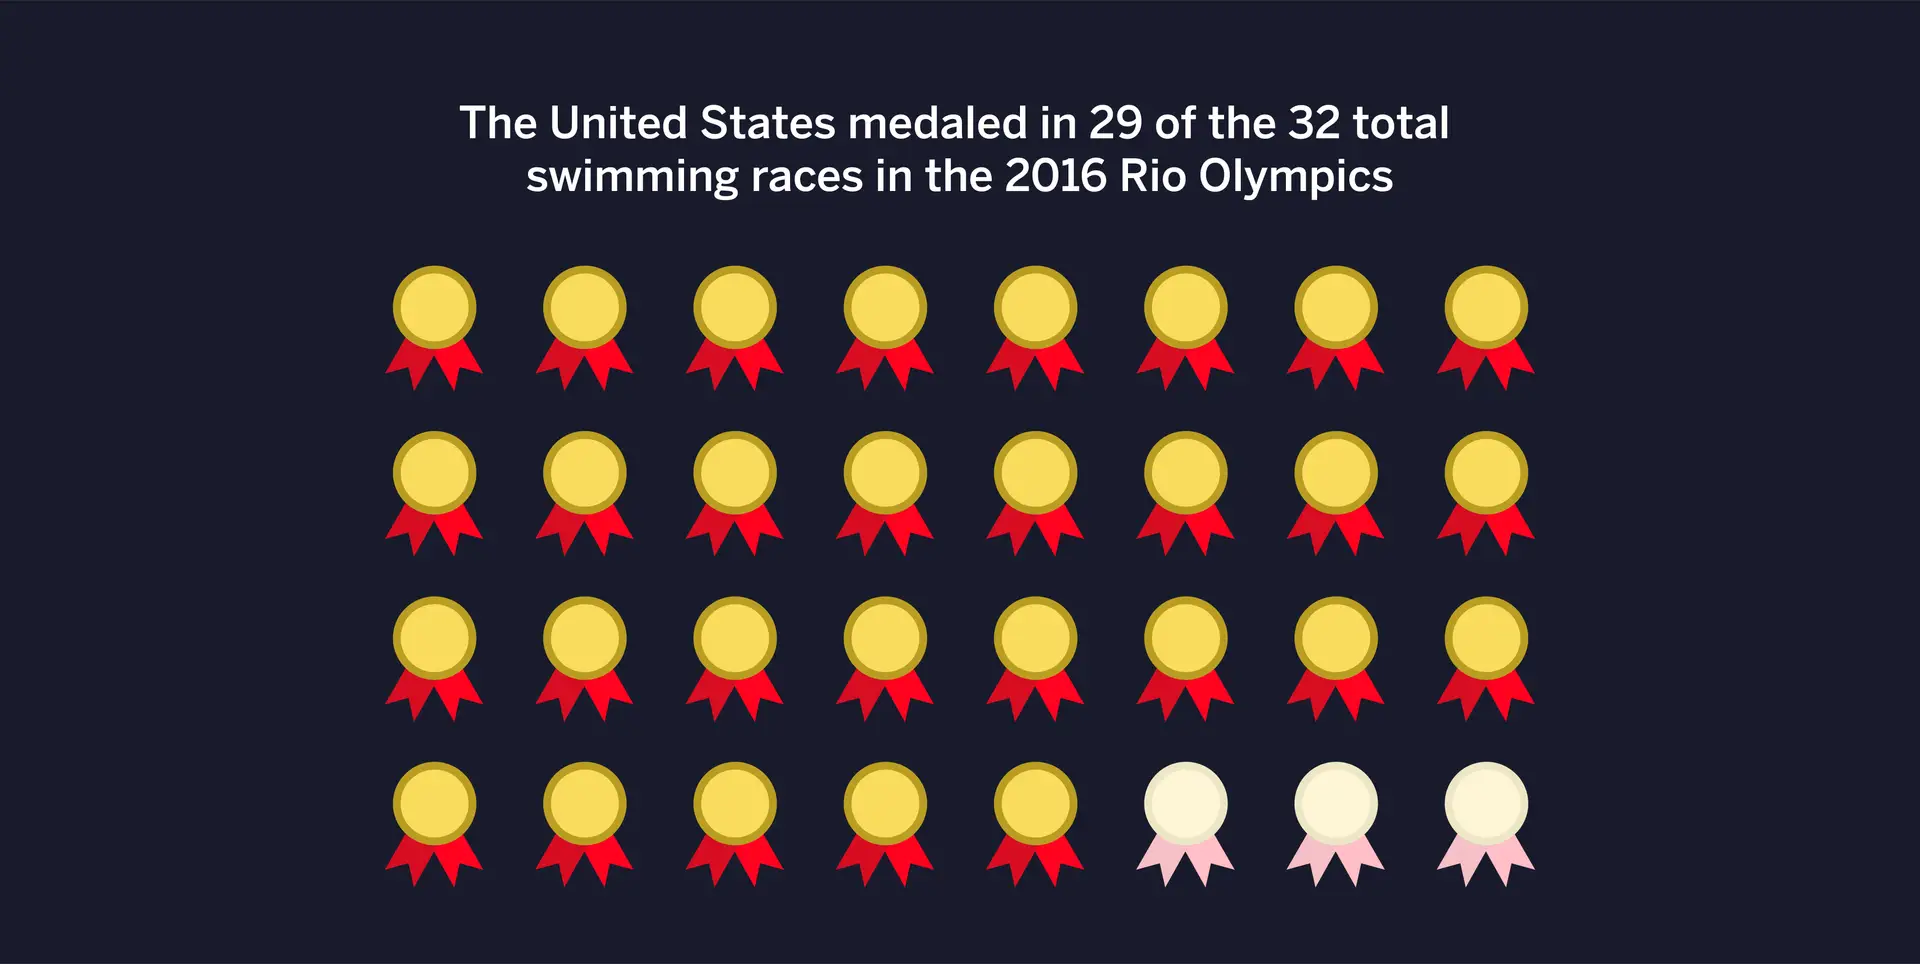 Upper hand – team usa has won medals in 29 of 32 swimming races at rio 2016 olympics